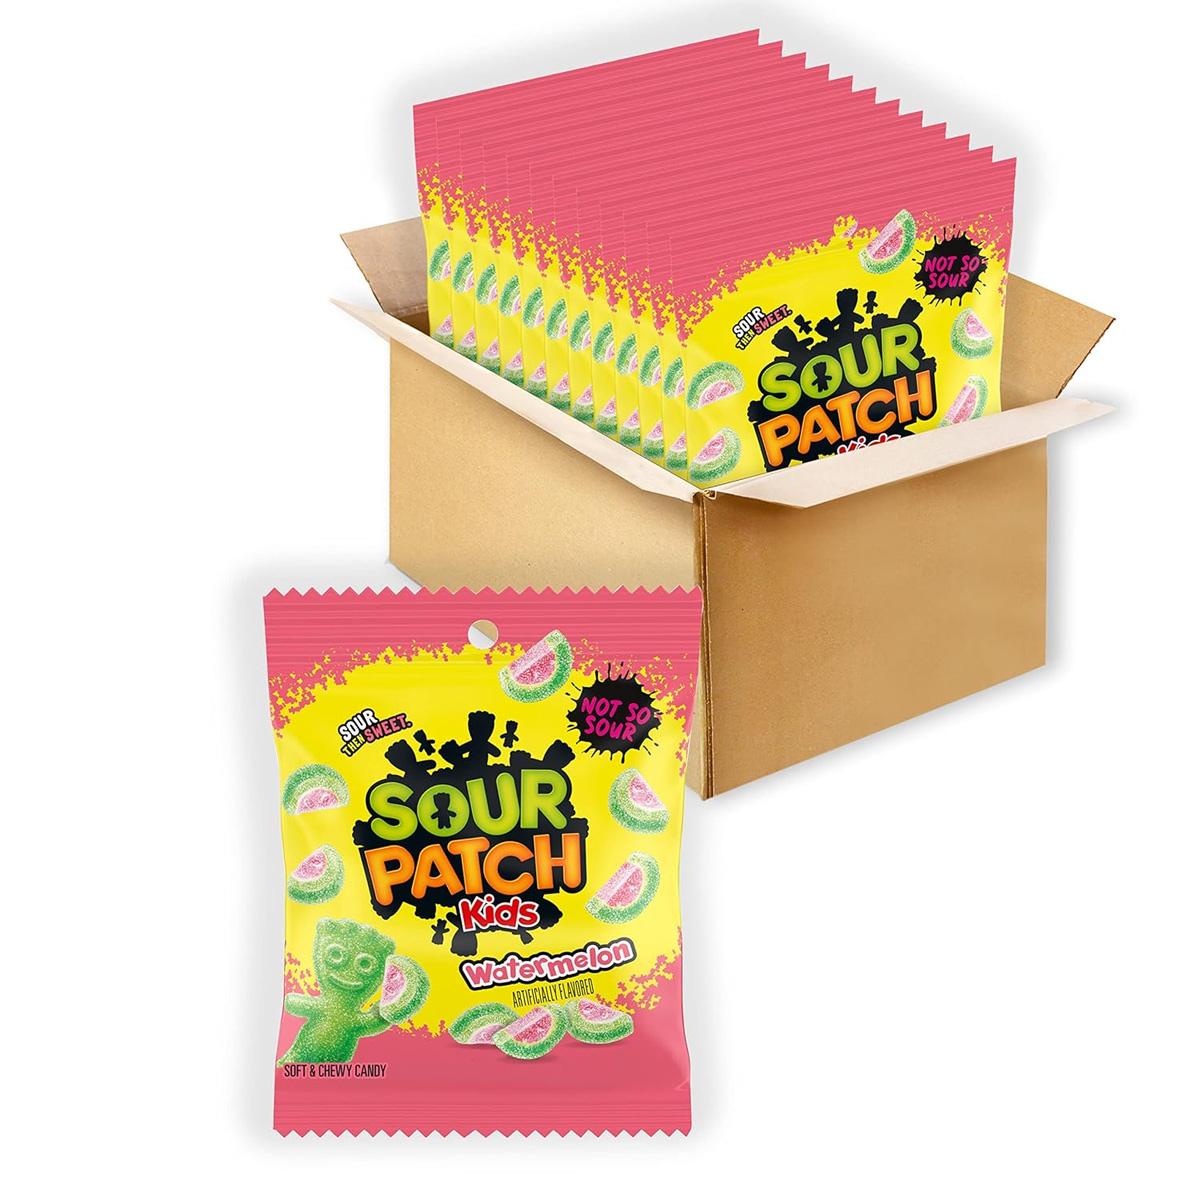 Sour Patch Kids Watermelon Soft and Chewy Candy 12 Bags for $8.83